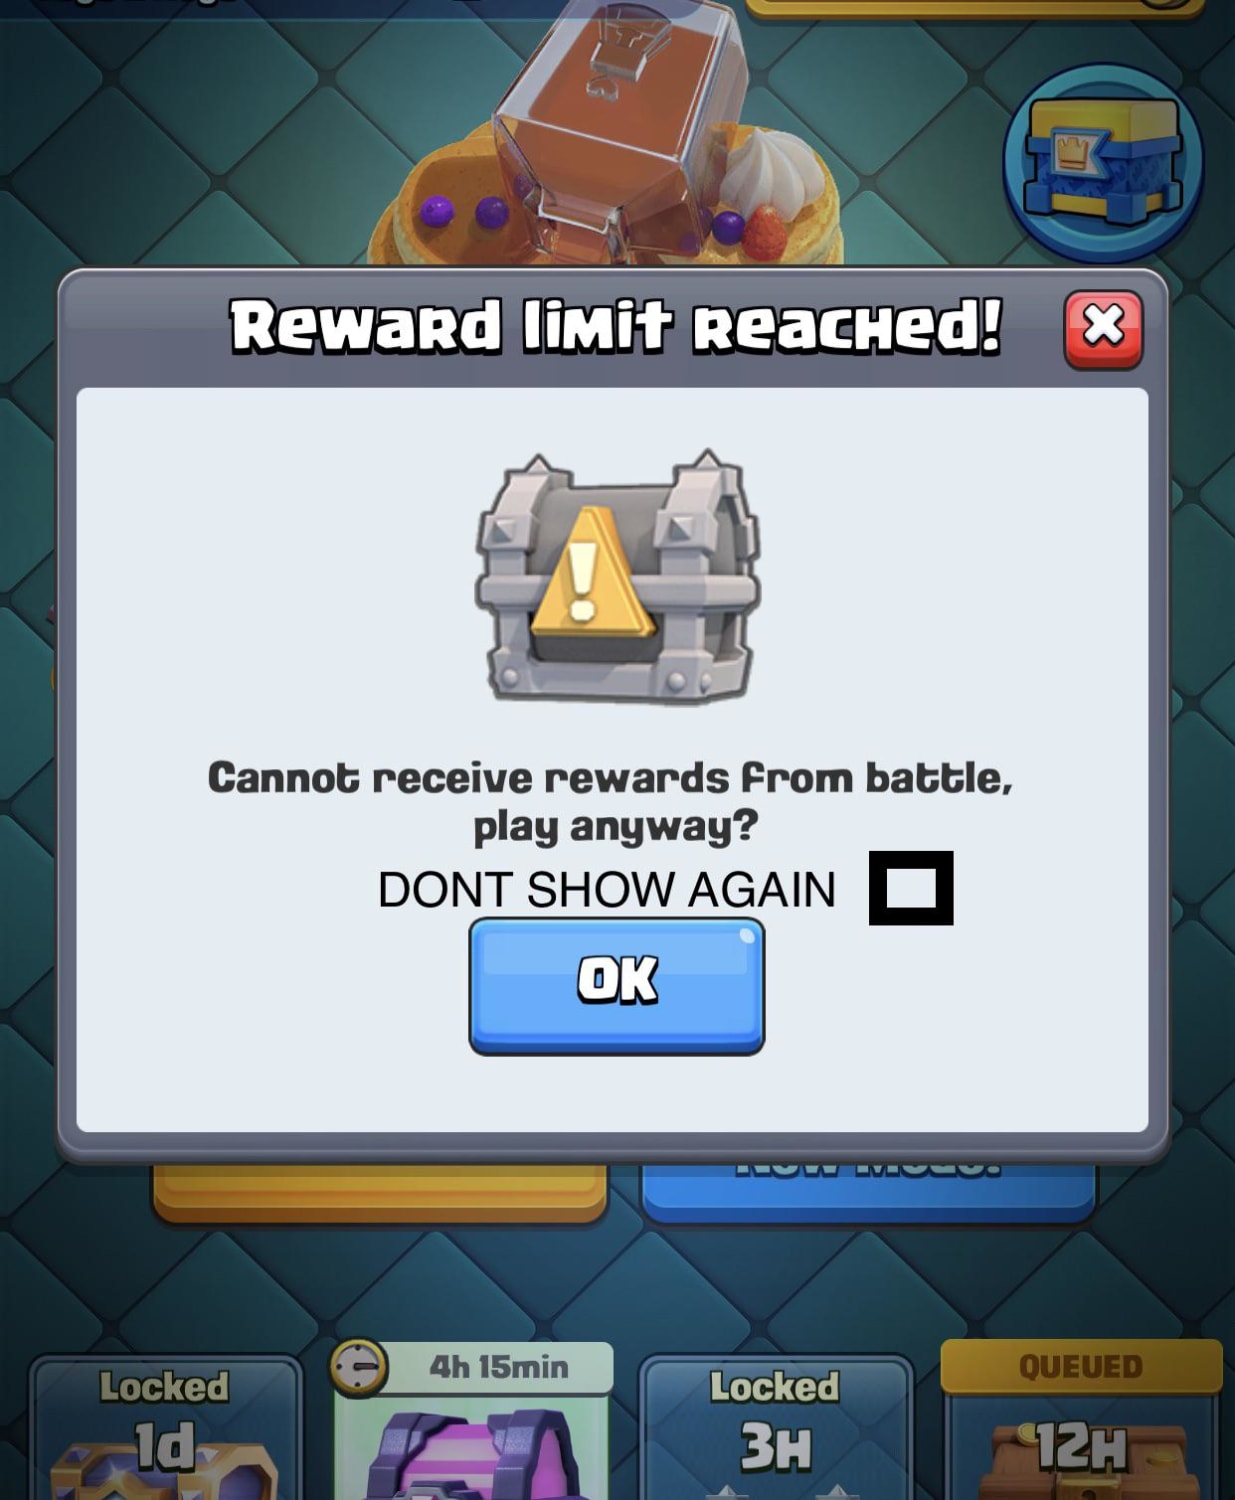 Quality of life changes supercell.. quality of life.